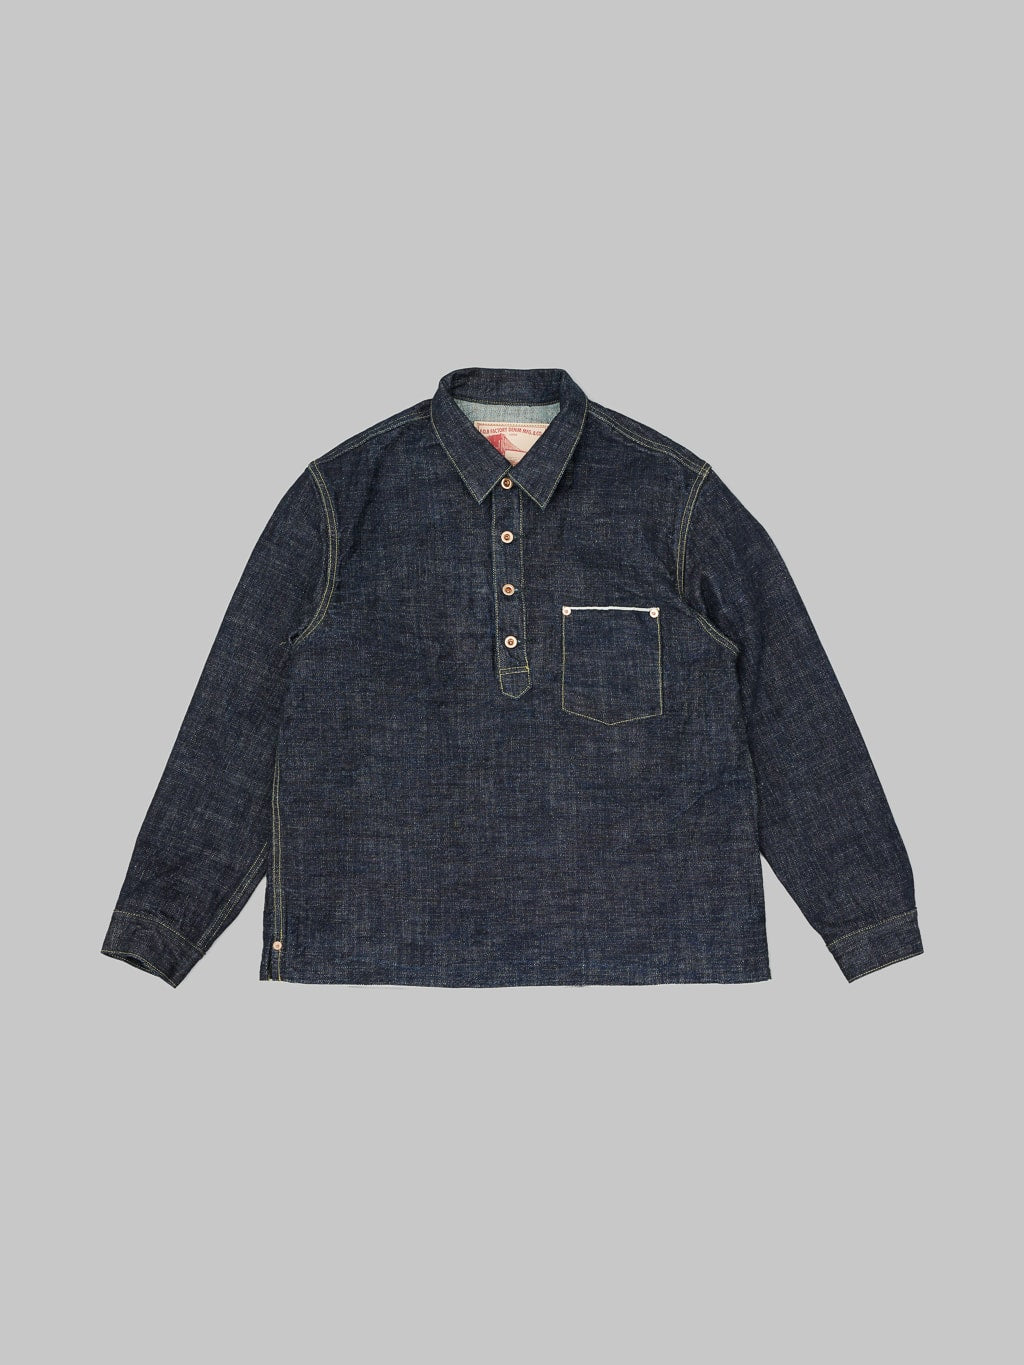 Fob factory denim pullover pocket shirt front view